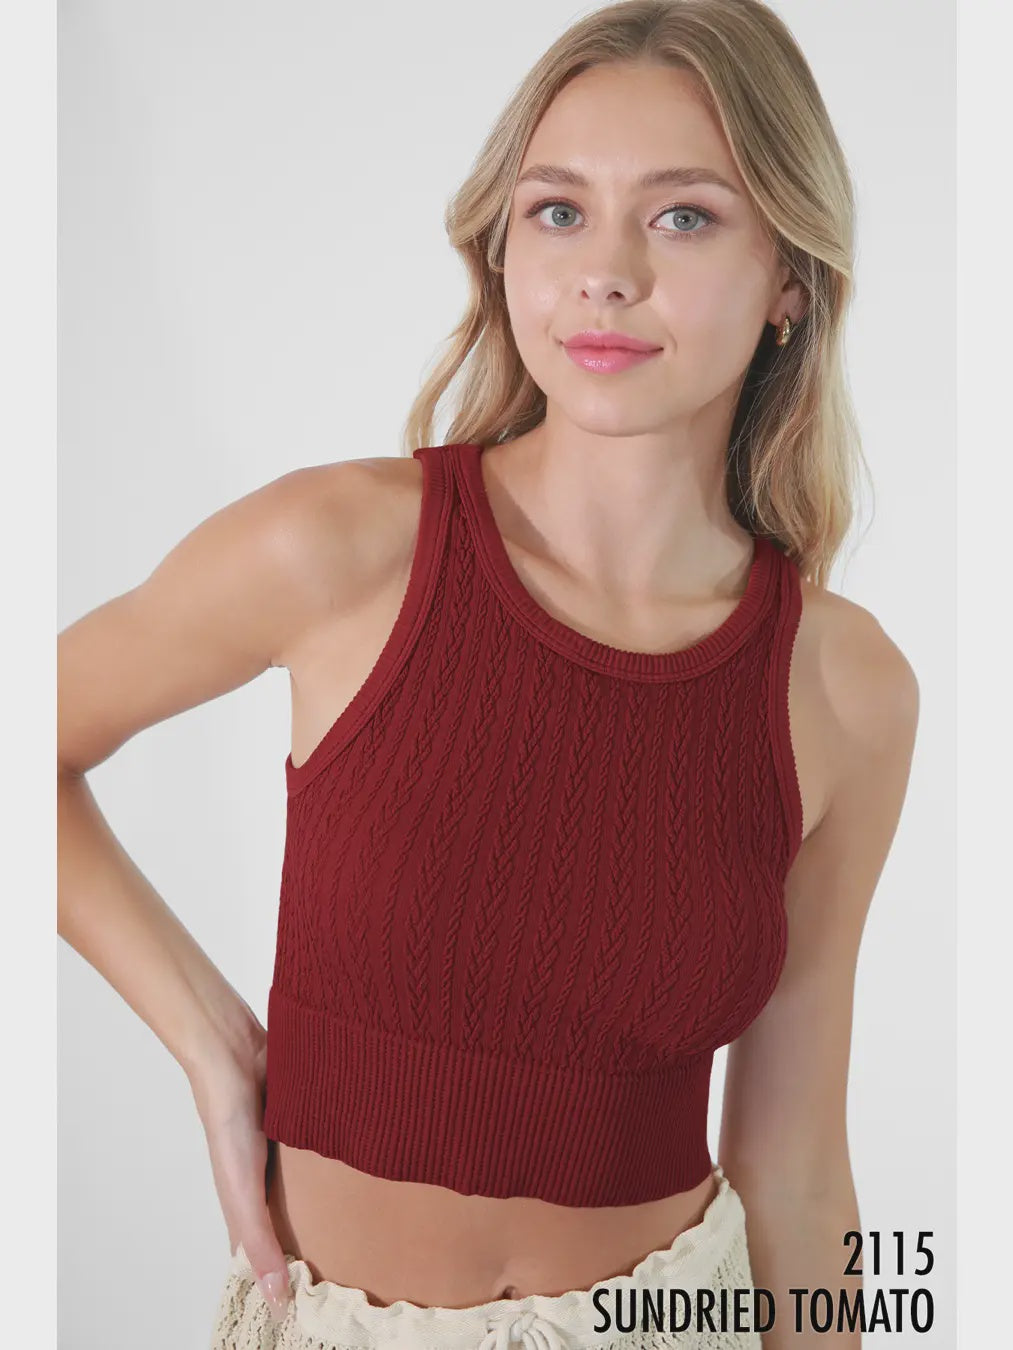 Cable Knit Crop Top - One Size - Sundried Tomato